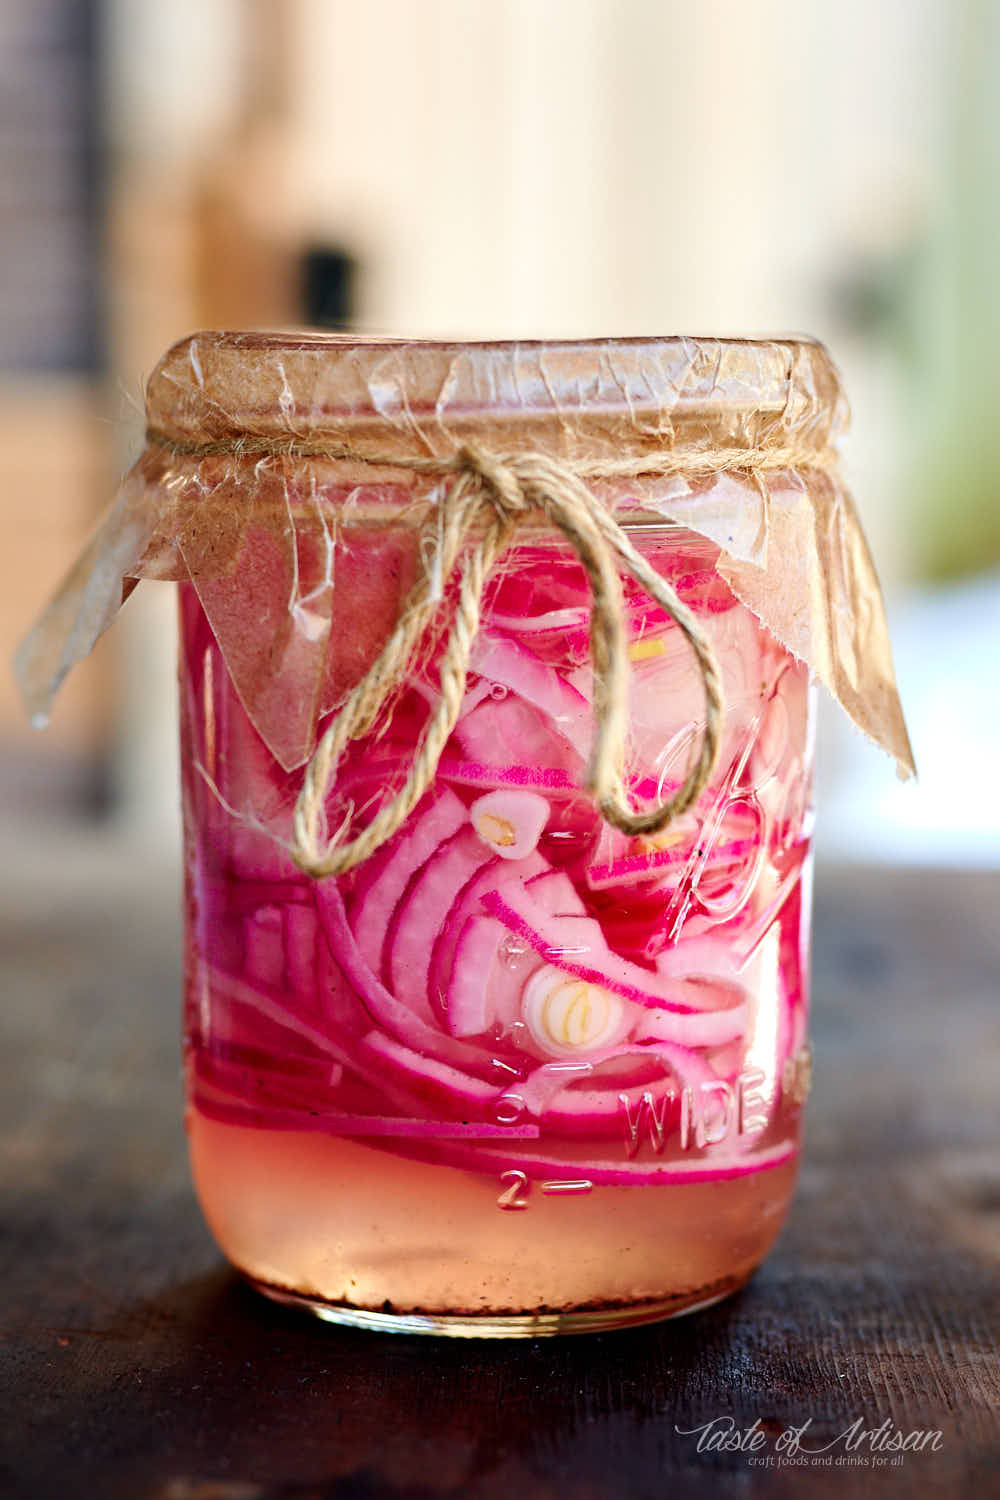 Sliced red onion in a jar with pickling juice.